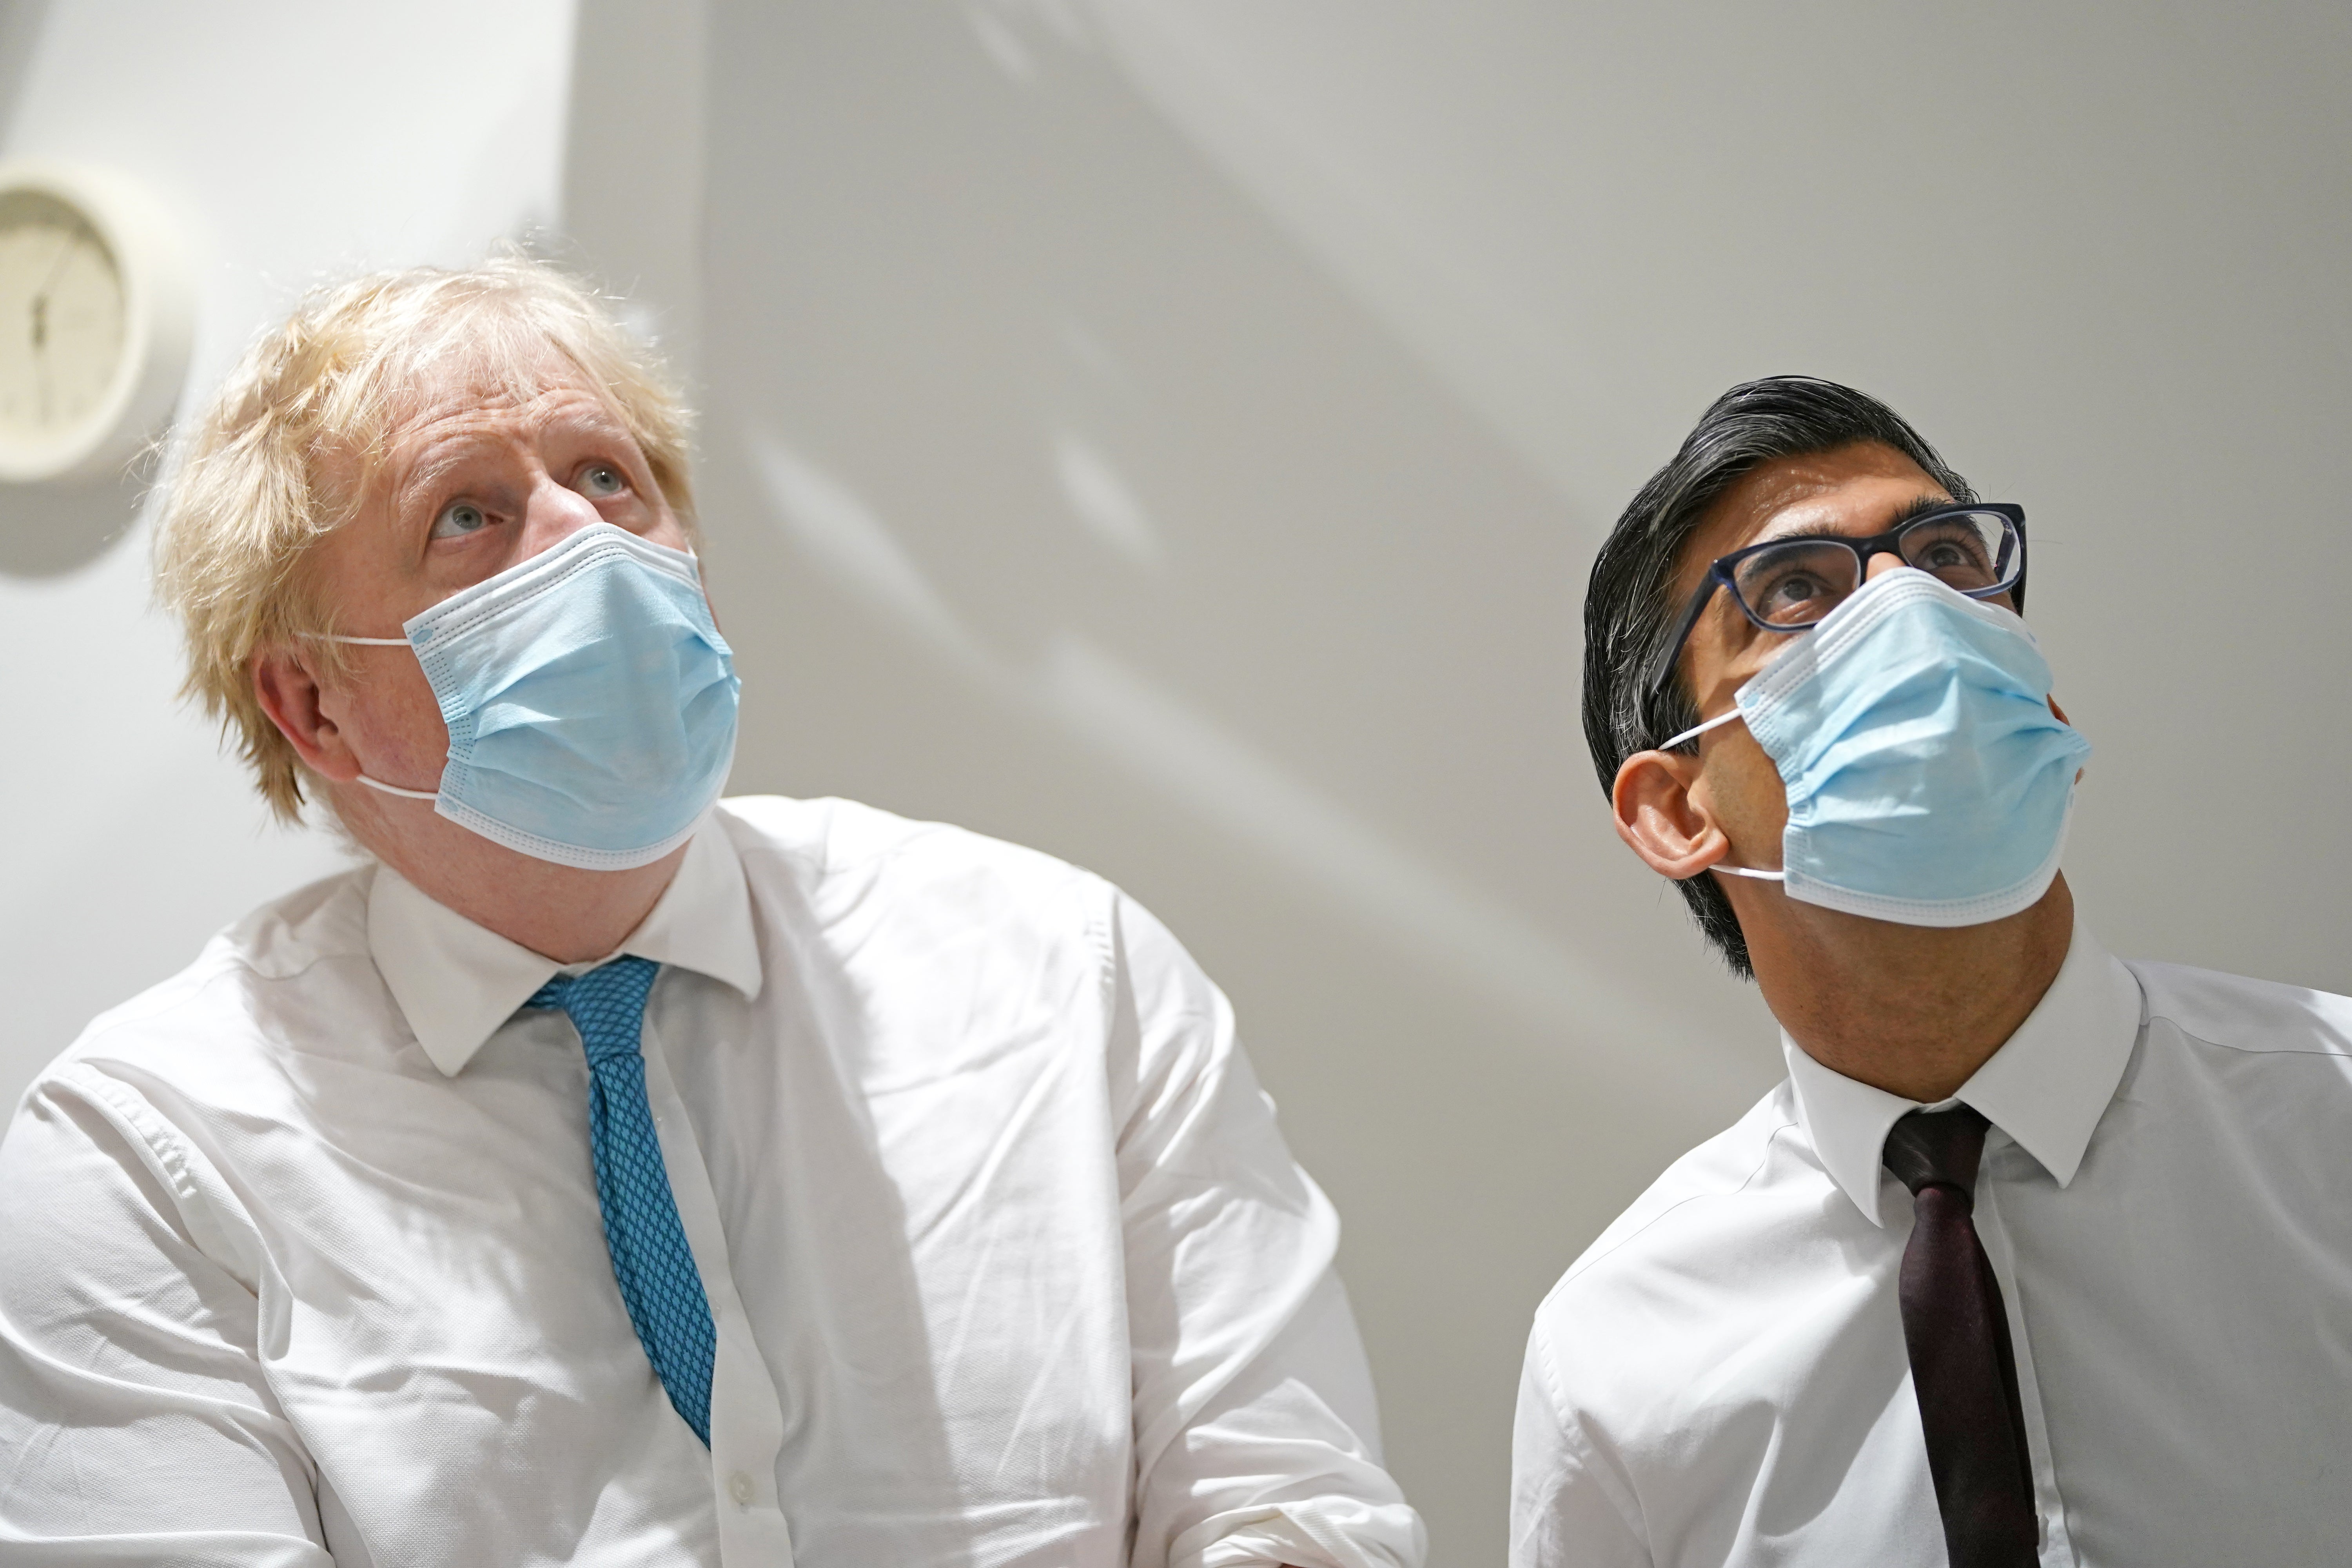 Prime Minister Boris Johnson and Chancellor Rishi Sunak during a visit to the Kent Oncology Centre at Maidstone Hospital (Gareth Fuller/PA)